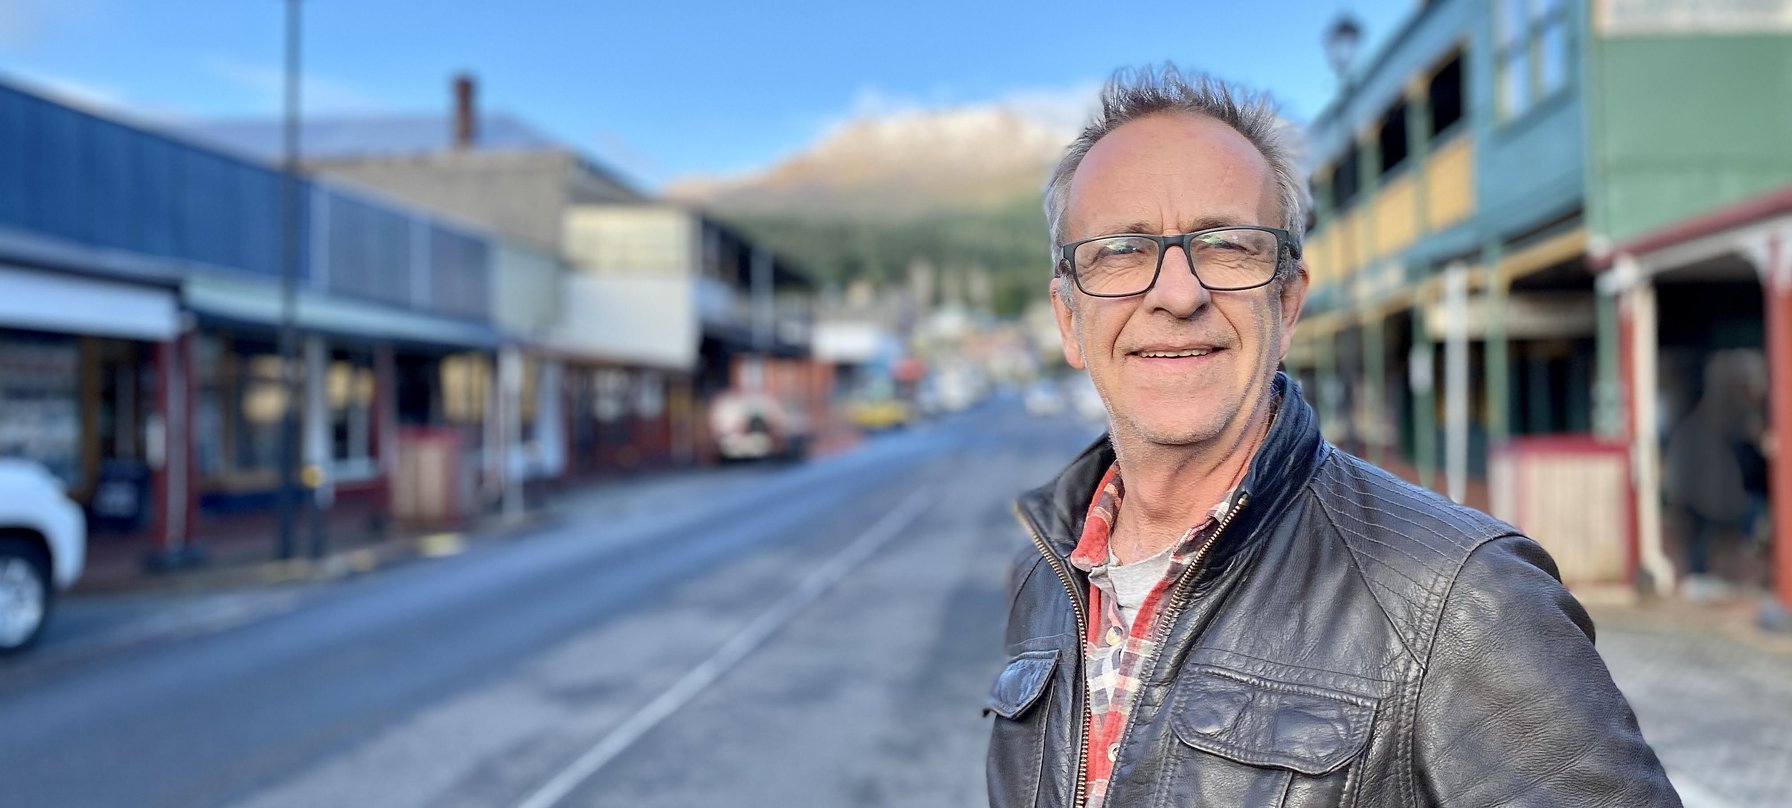 A photo of David "Fitzy" Fitzpatrick standing on Orr Street, Queenstown. Fitzy is smiling and wearing a flannelette shift under a leather jacket.